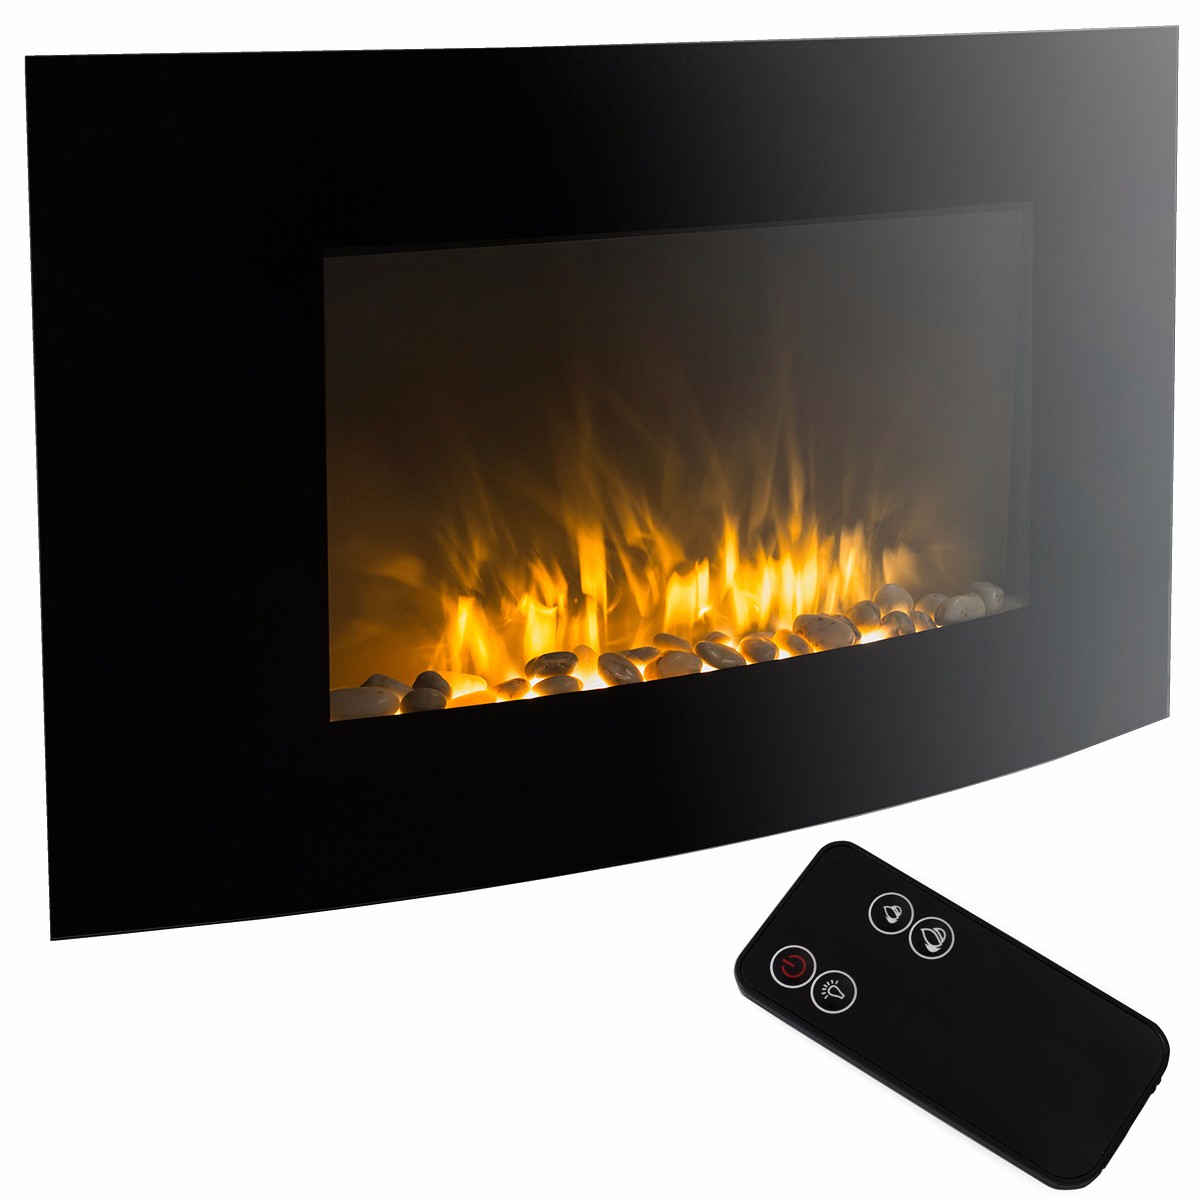 Duraflame Electric Fireplace Insert Best Of Electric Fireplace Insert with Remote Control Fireplace